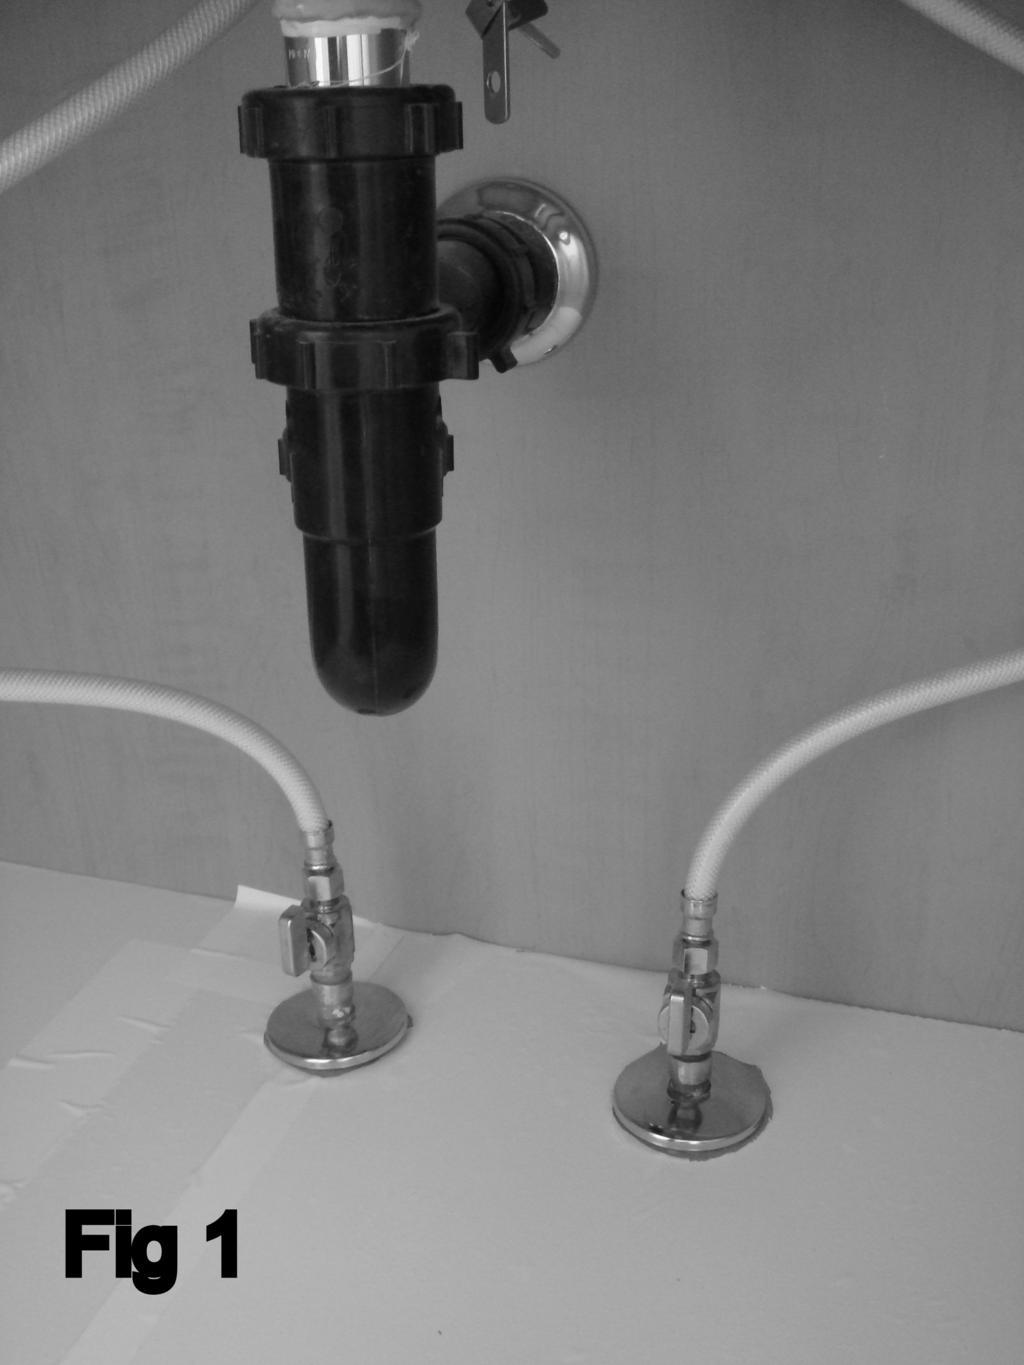 water to the sink fixture. (Fig 1) 2.